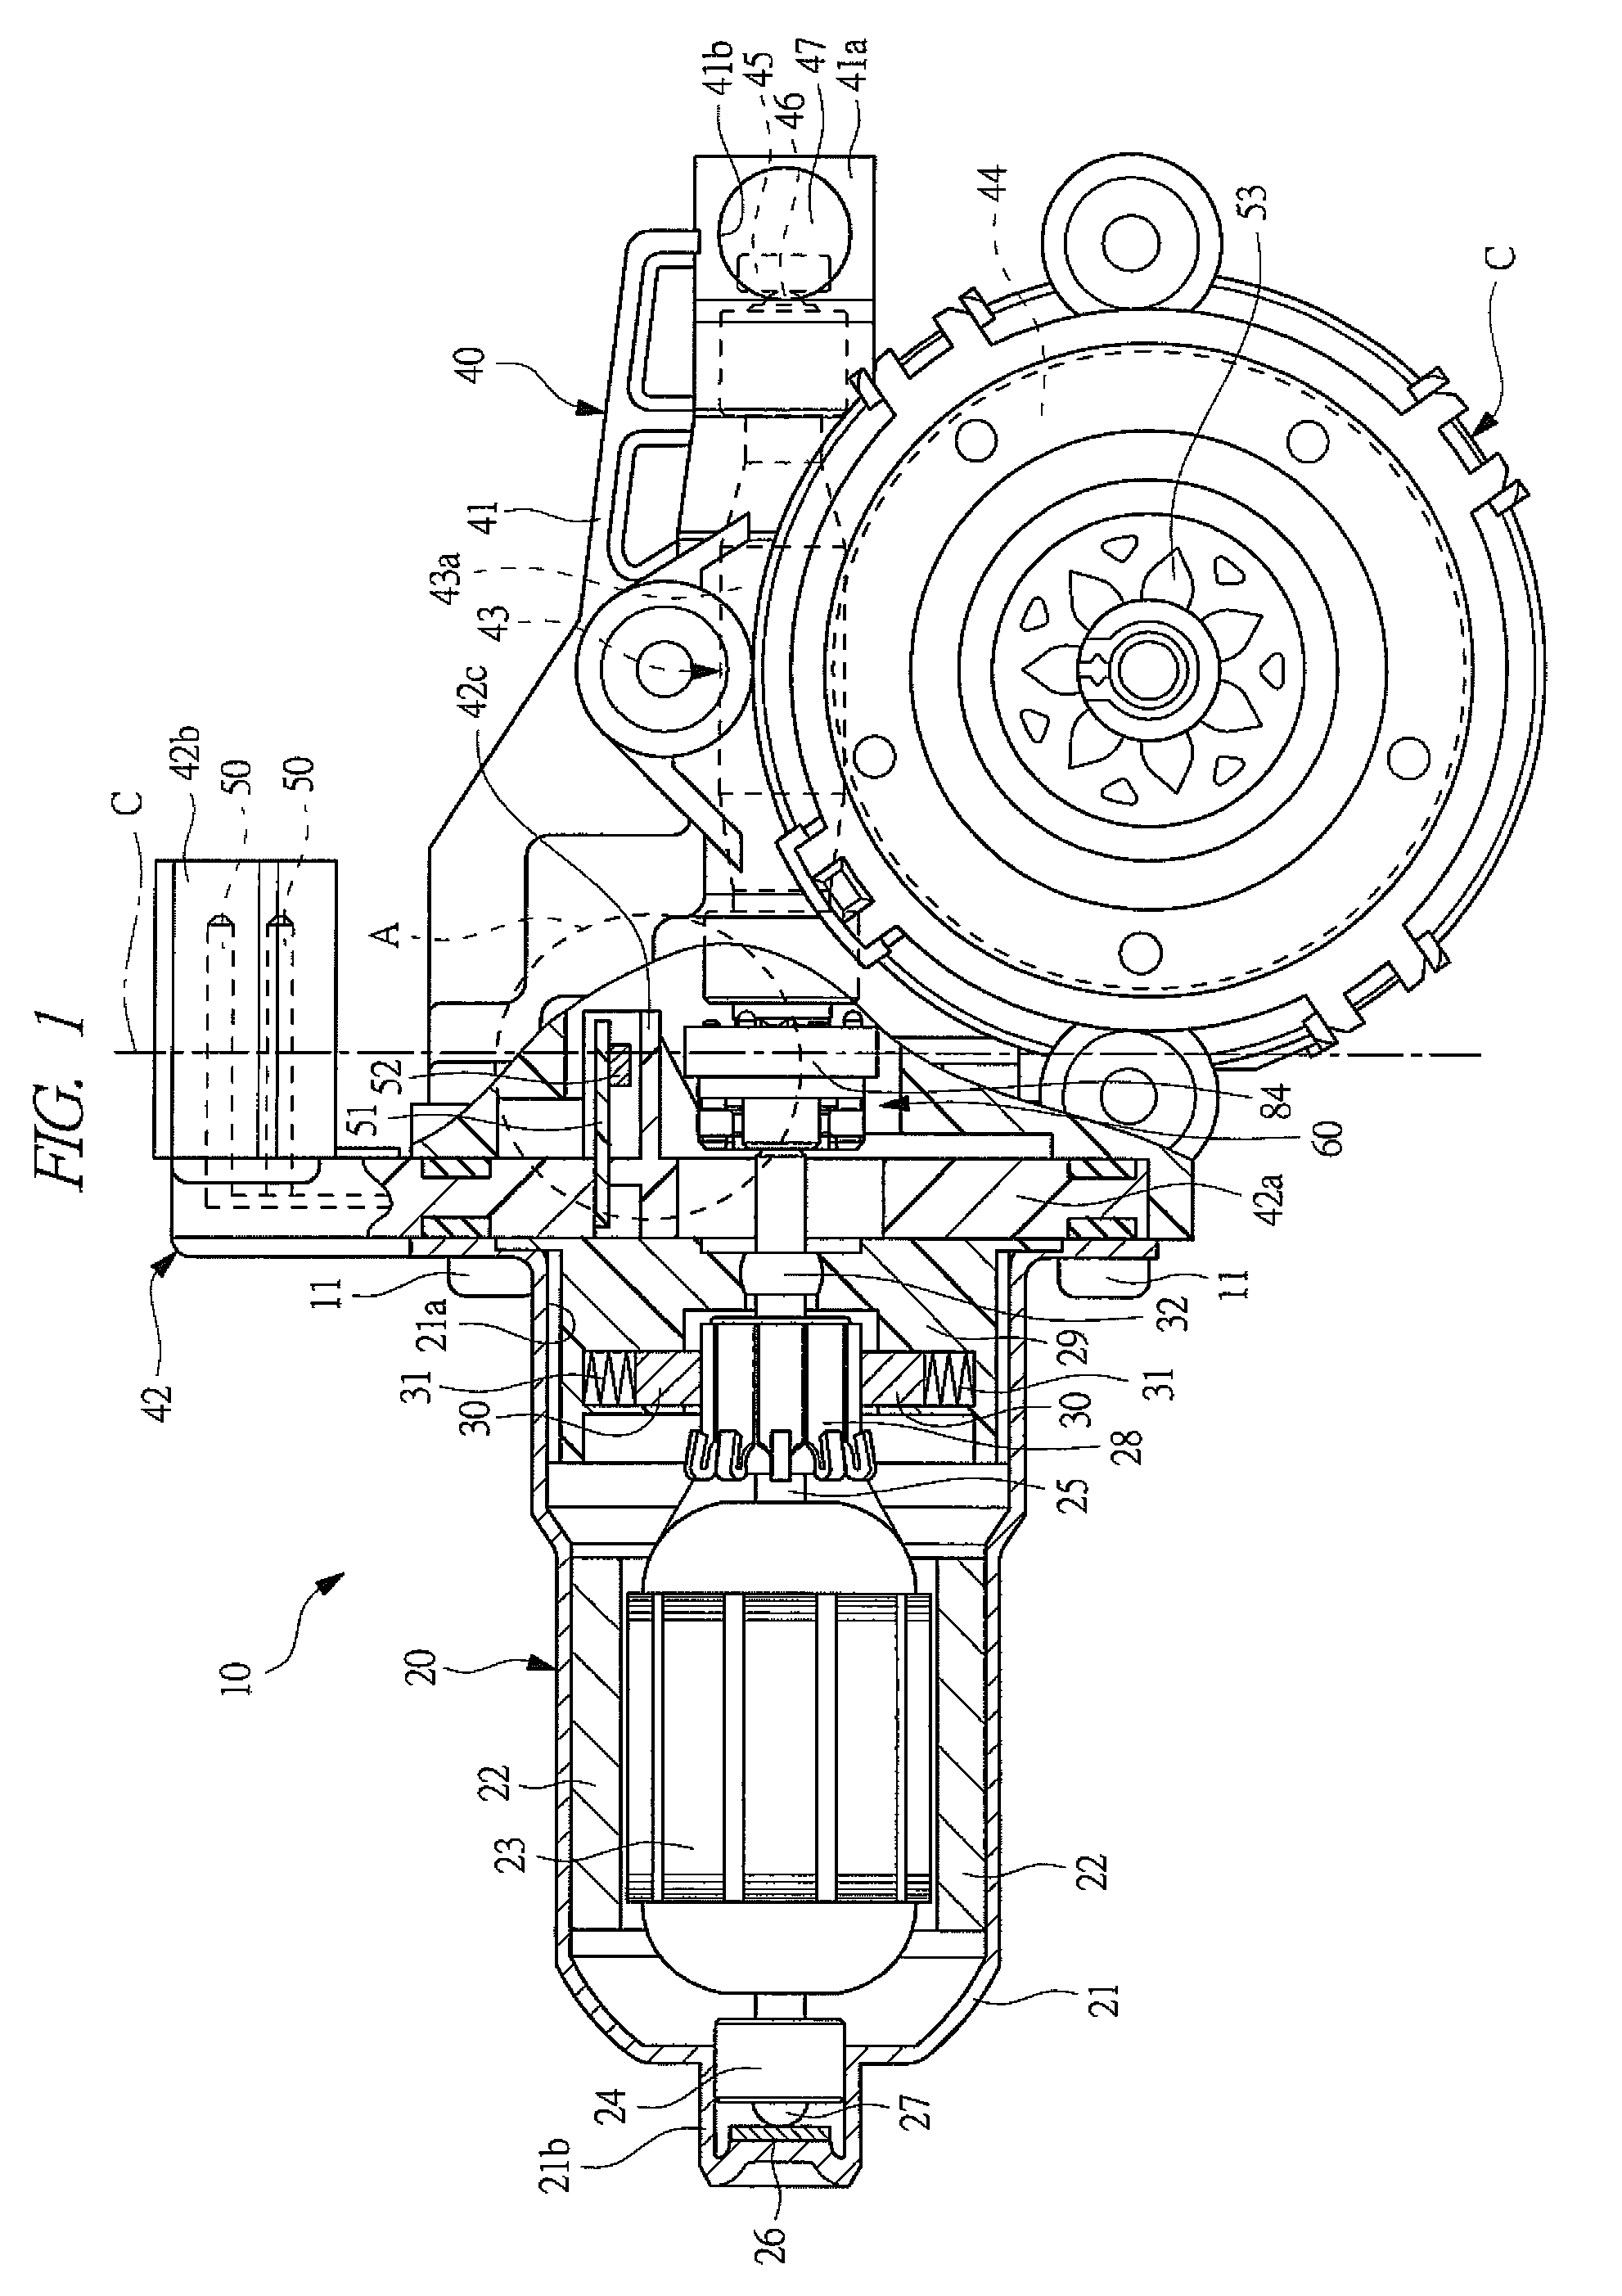 Motor with speed reduction mechanism capable of absorbing axial deviation between armature shaft and worm shaft